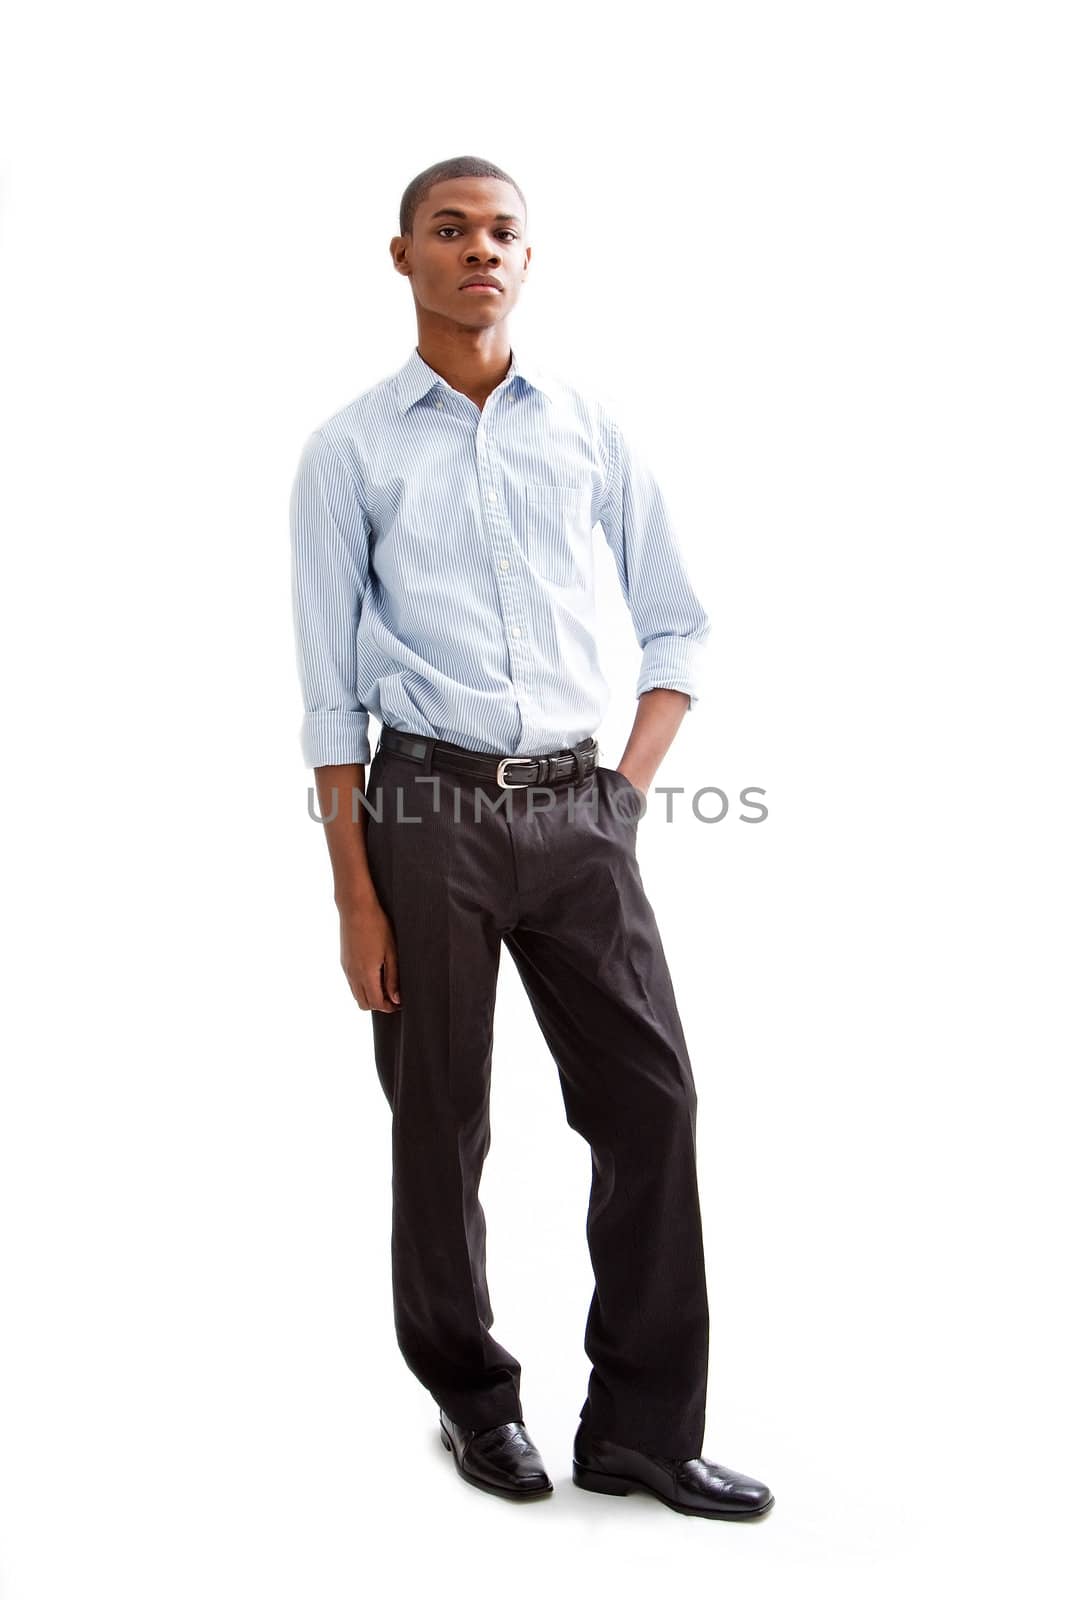 Young African business man standing relaxed and secure with hands in pocket, isolated